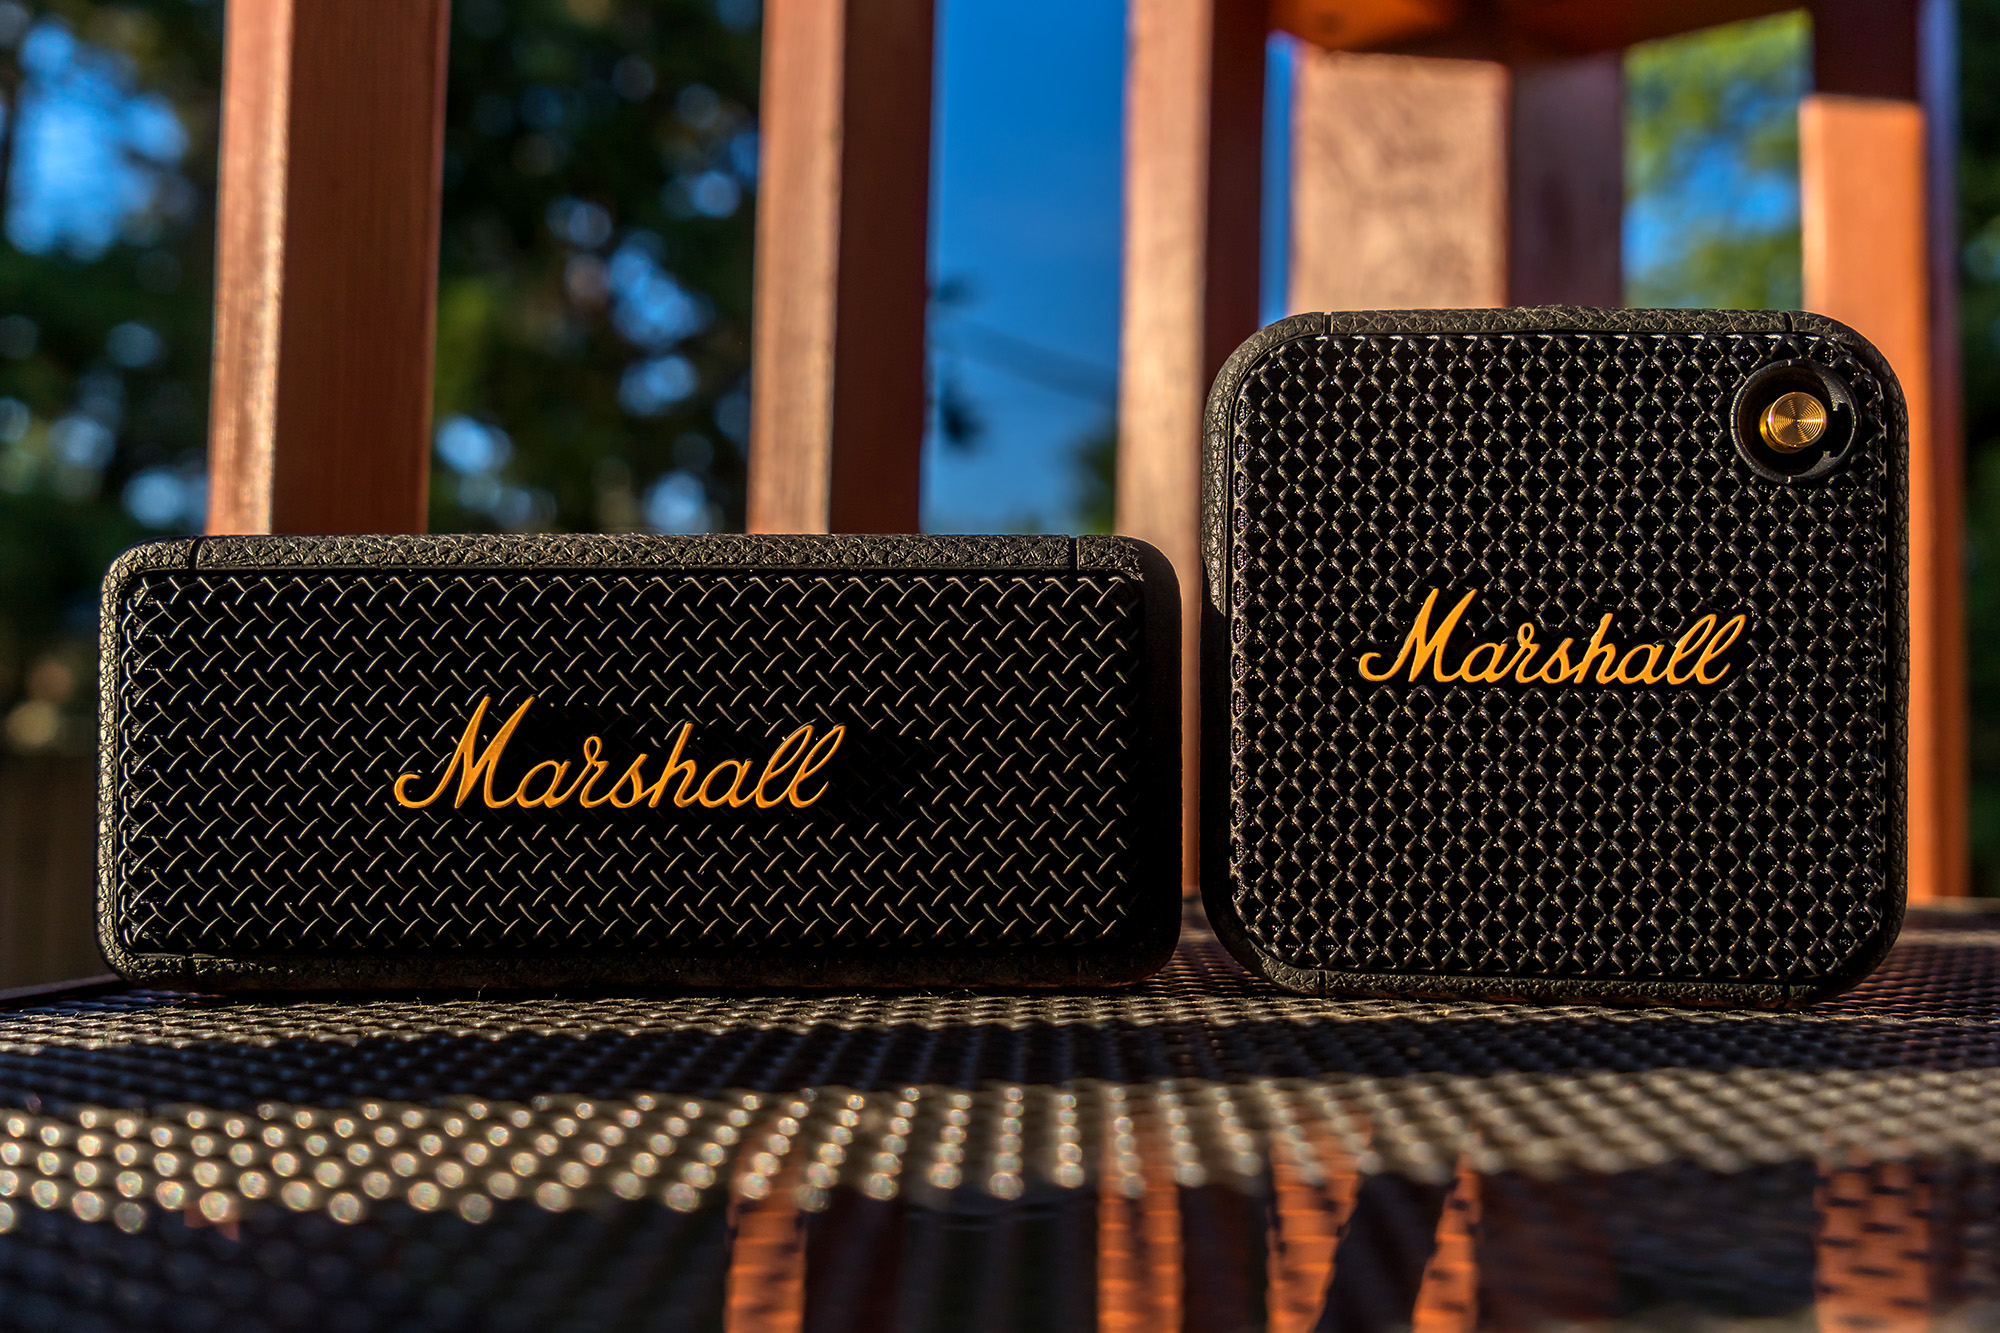 Marshall style Emberton and Trends II Willen in Digital Go review: anywhere |